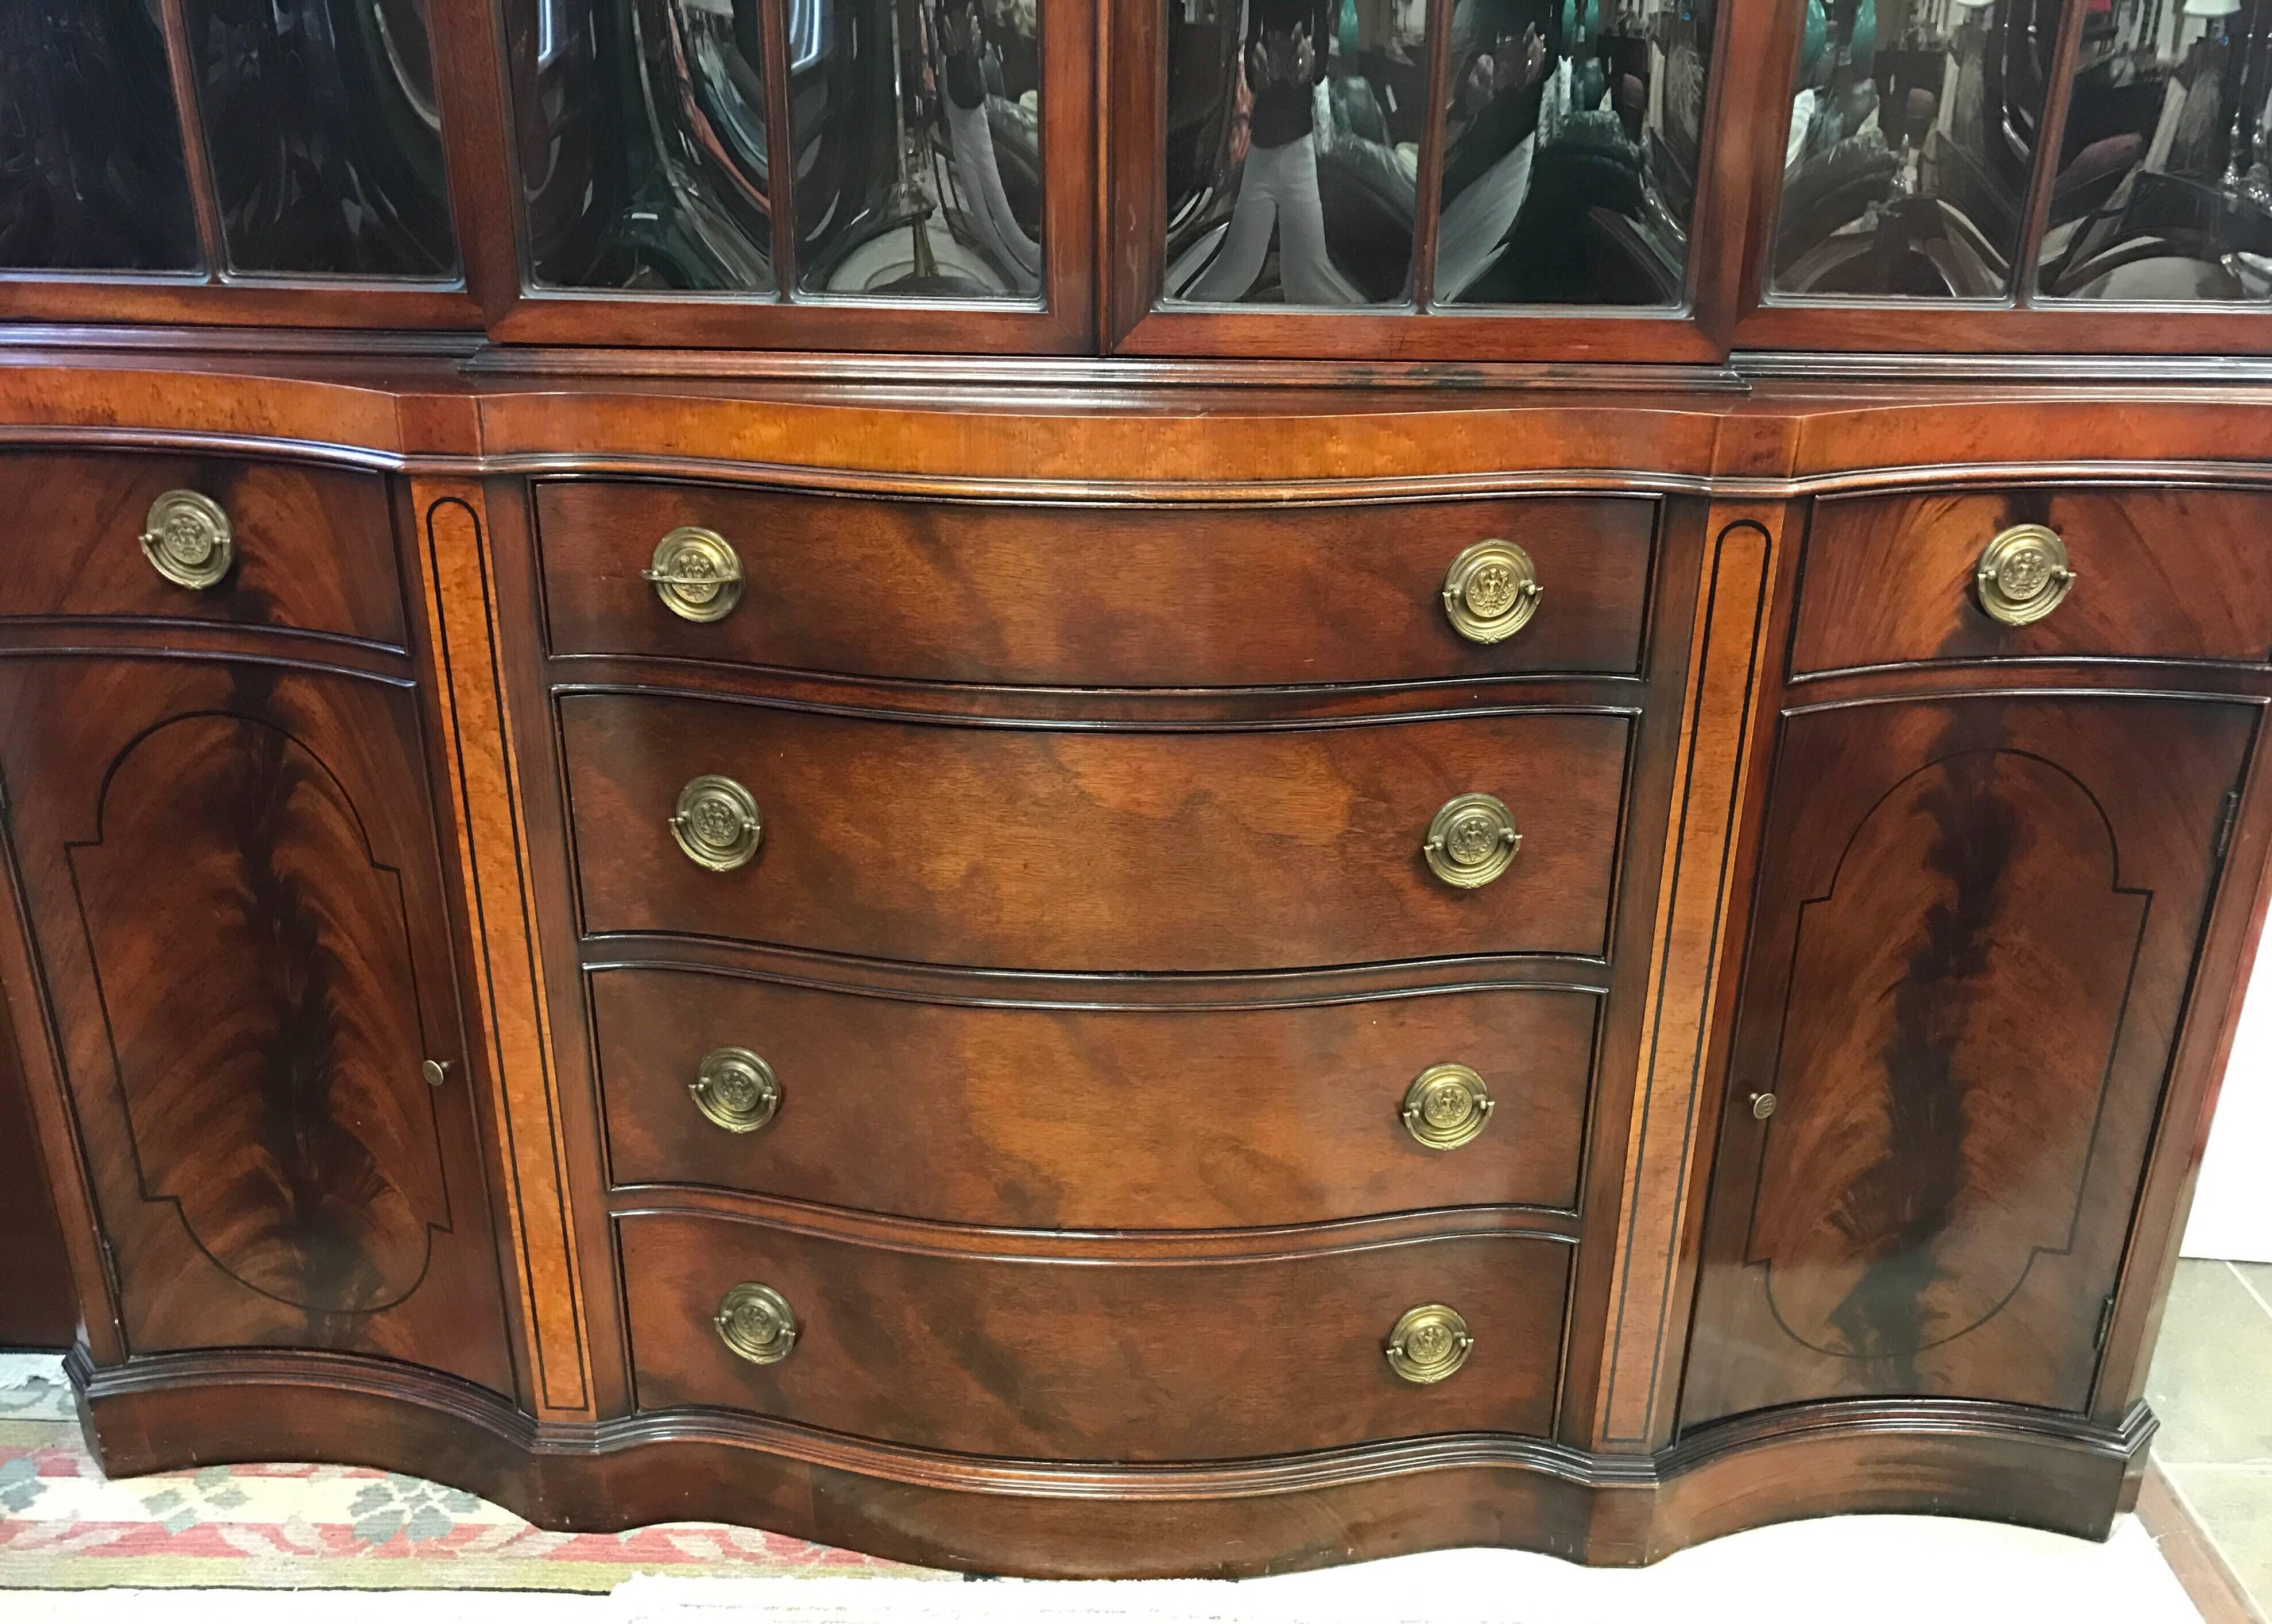 Magnificent flame mahogany two part breakfront or bookcase. Top part has four glazed doors that open to three shelves with grooves to display china. Bottom part has drop down butler's desk having a tooled leather writing surface with smaller drawers